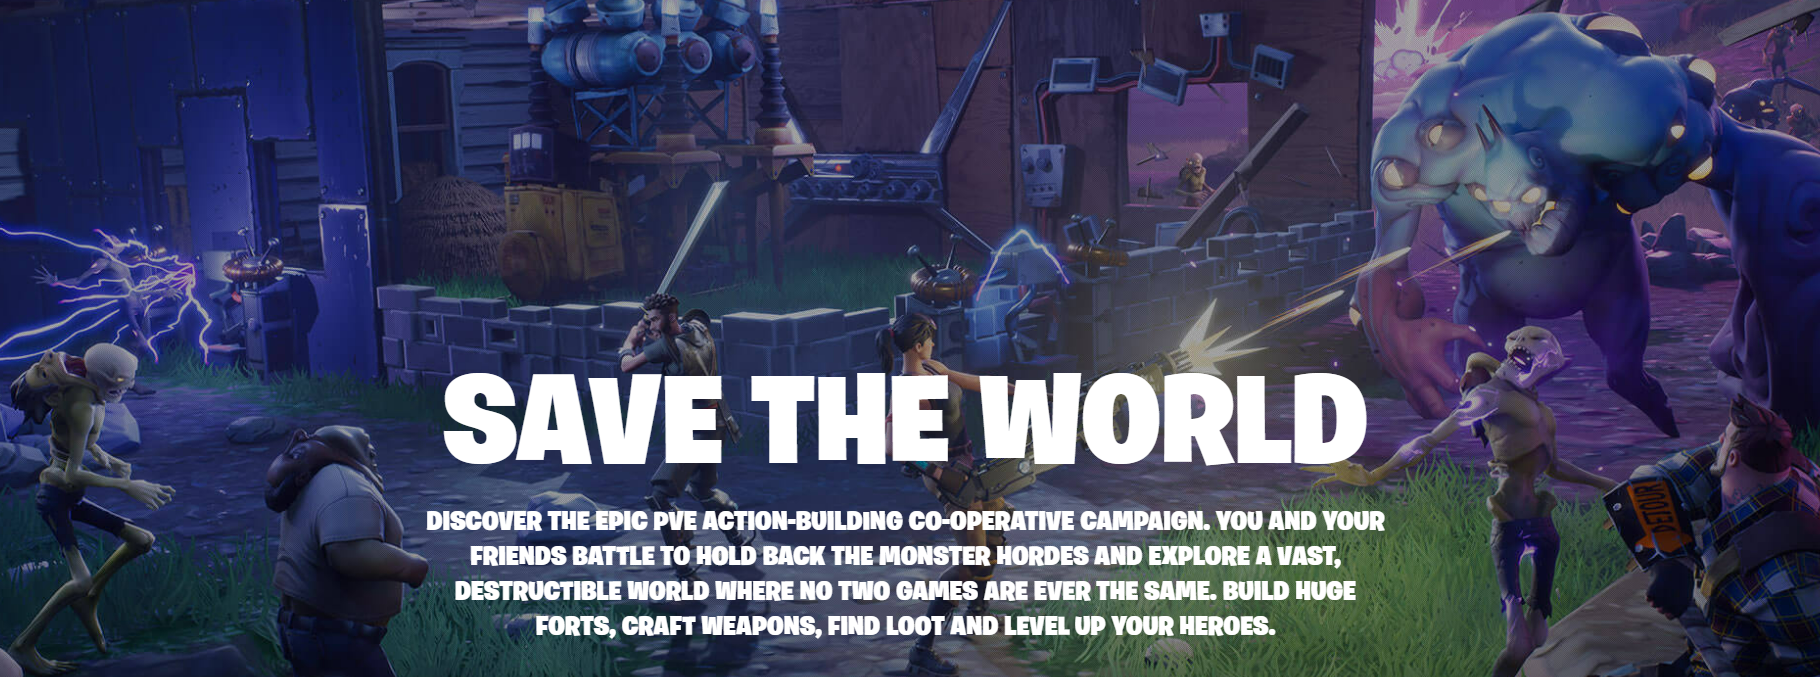 Save the World Campaign